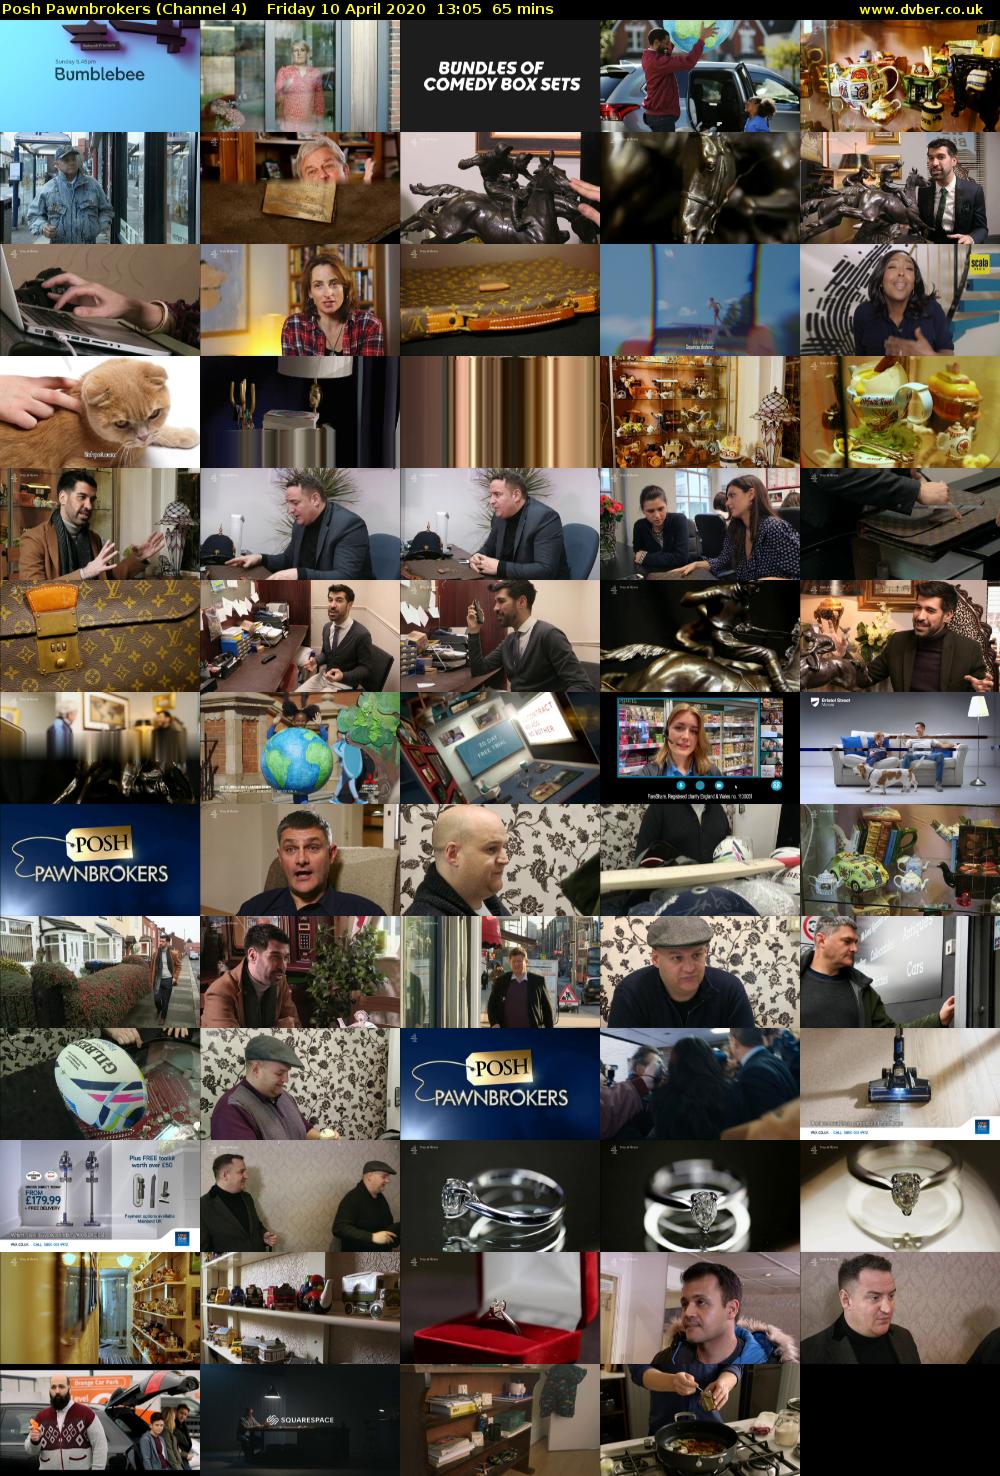 Posh Pawnbrokers (Channel 4) Friday 10 April 2020 13:05 - 14:10